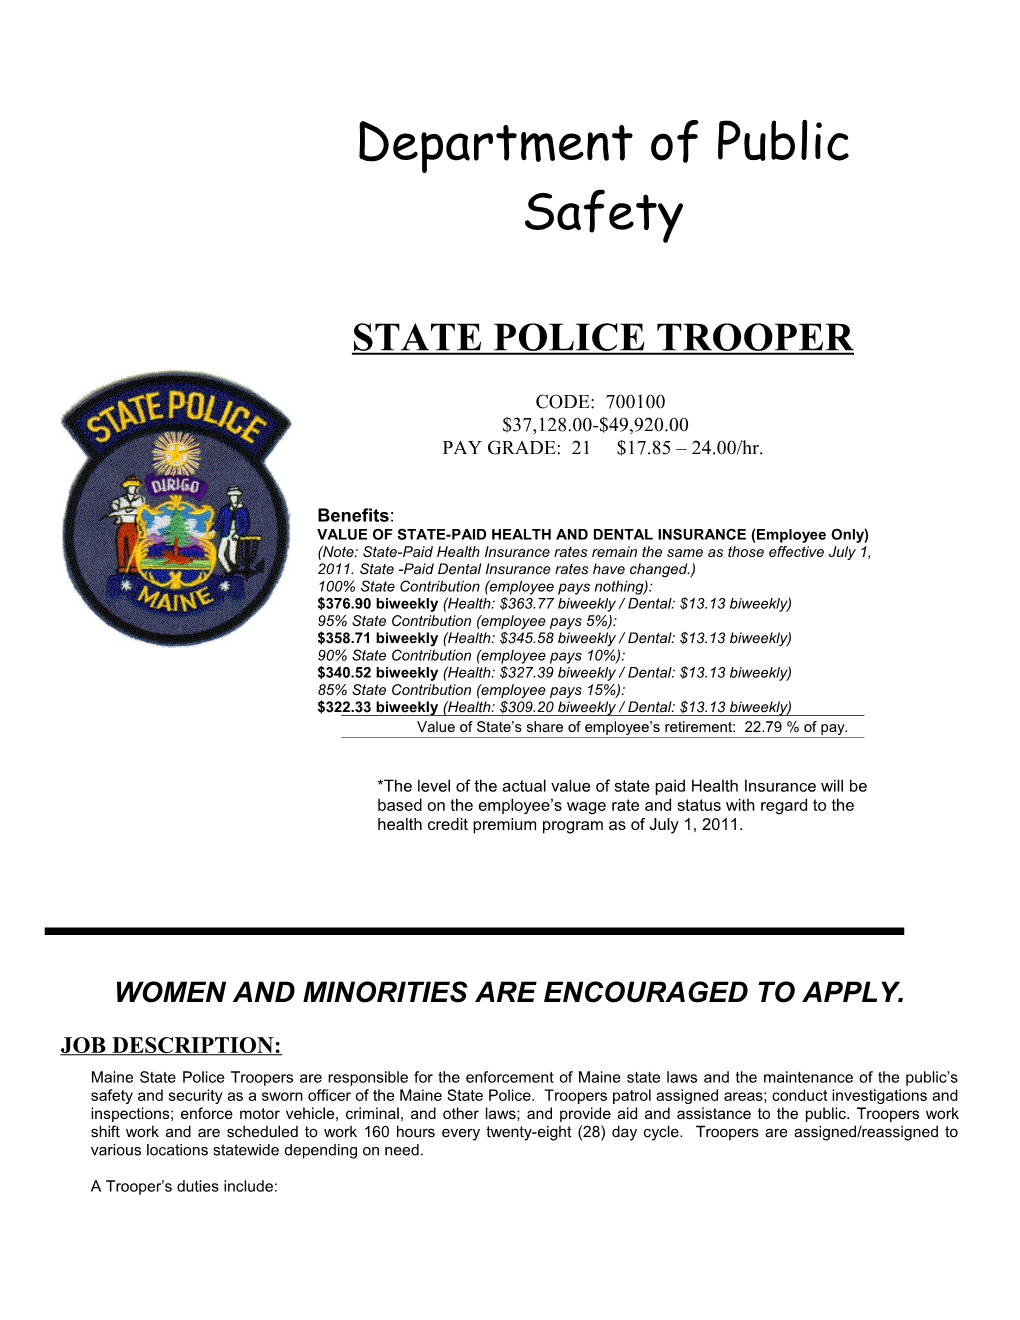 Women and Minorities Are Encouraged to Apply